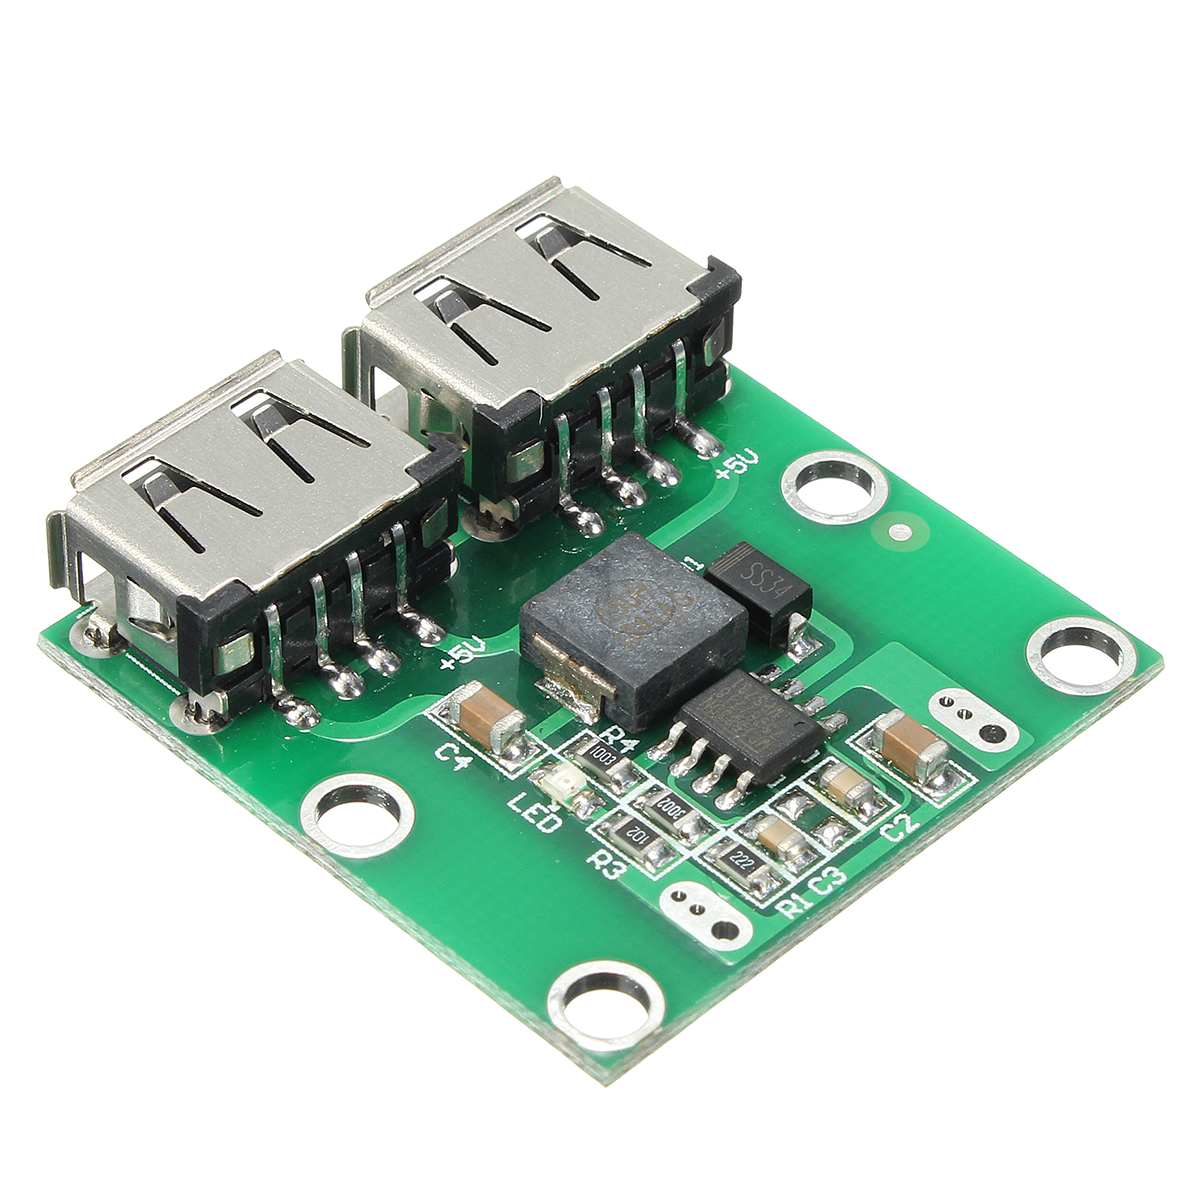 3Pcs-Dual-USB-Output-6-24V-To-52V-3A-DC-DC-Step-Down-Power-Charger-Module-Converter-1123516